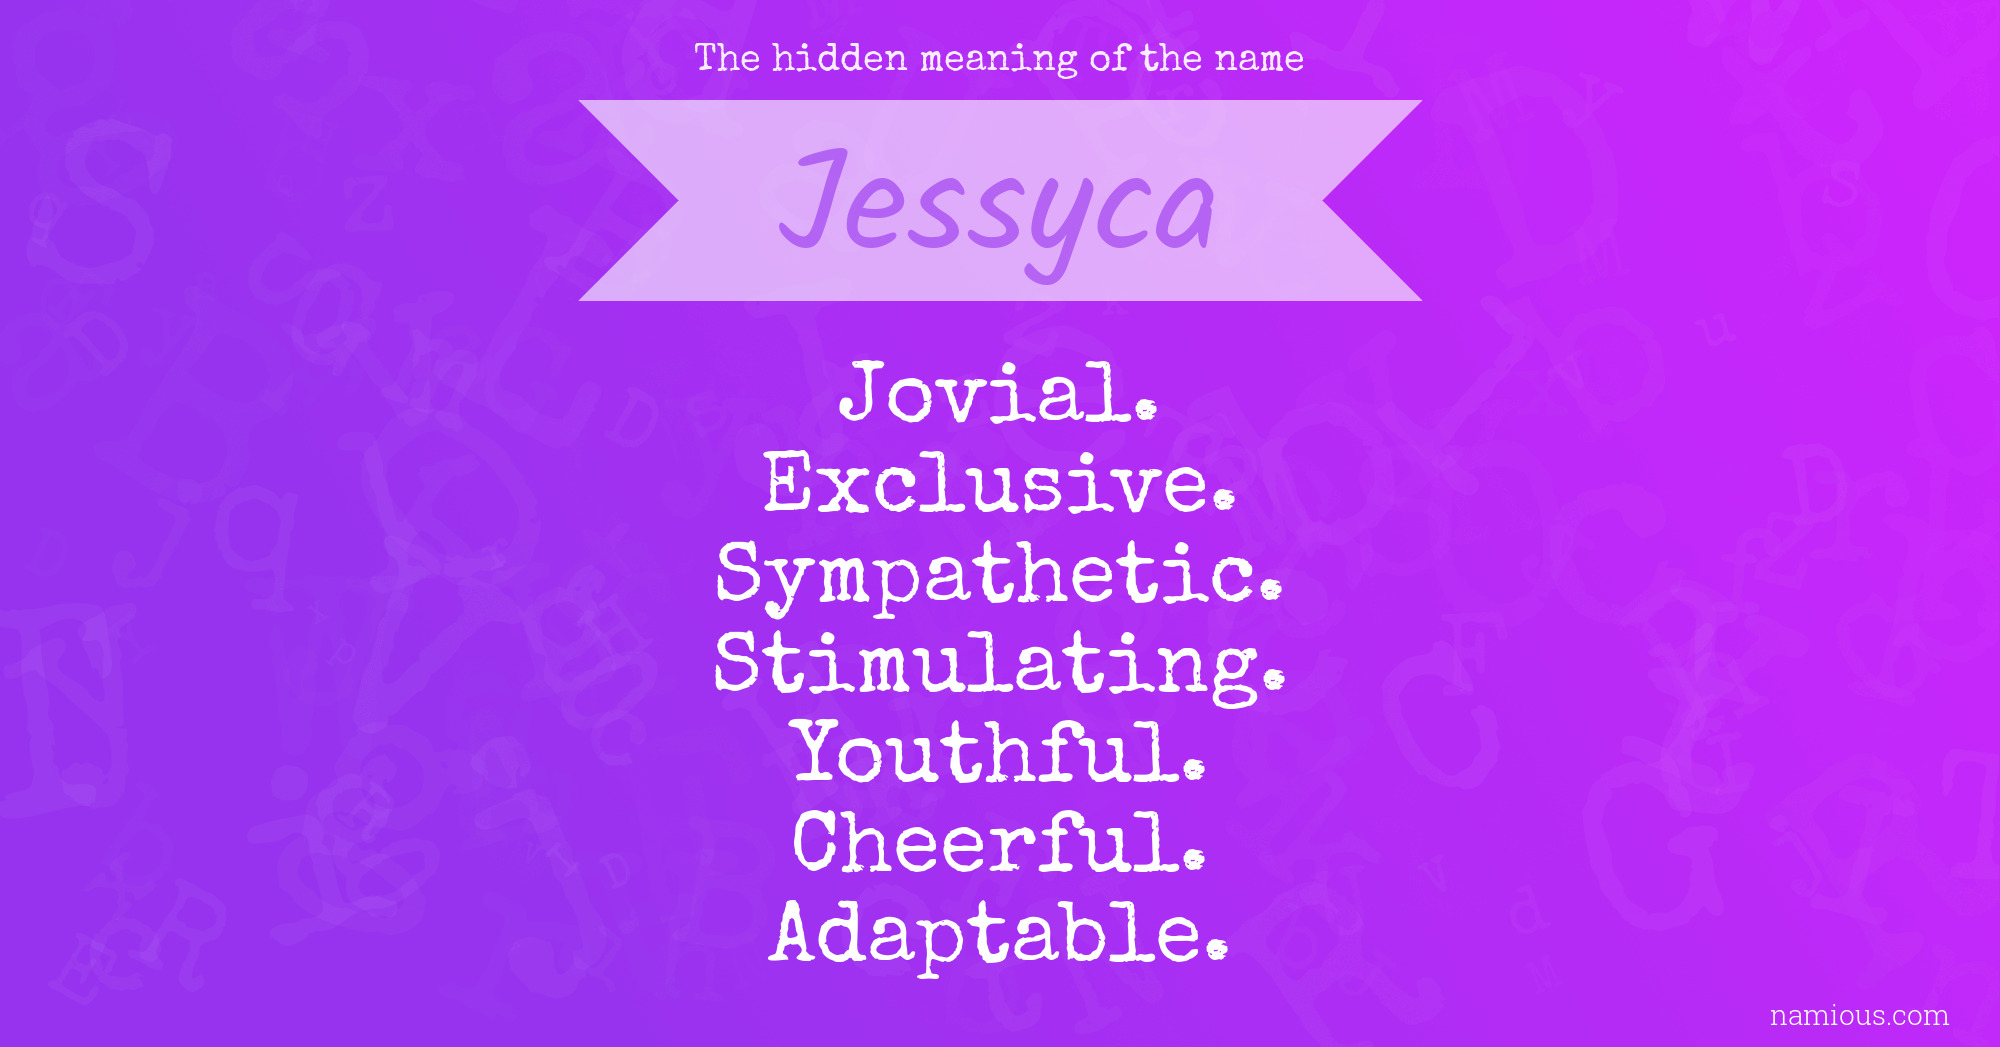 The hidden meaning of the name Jessyca